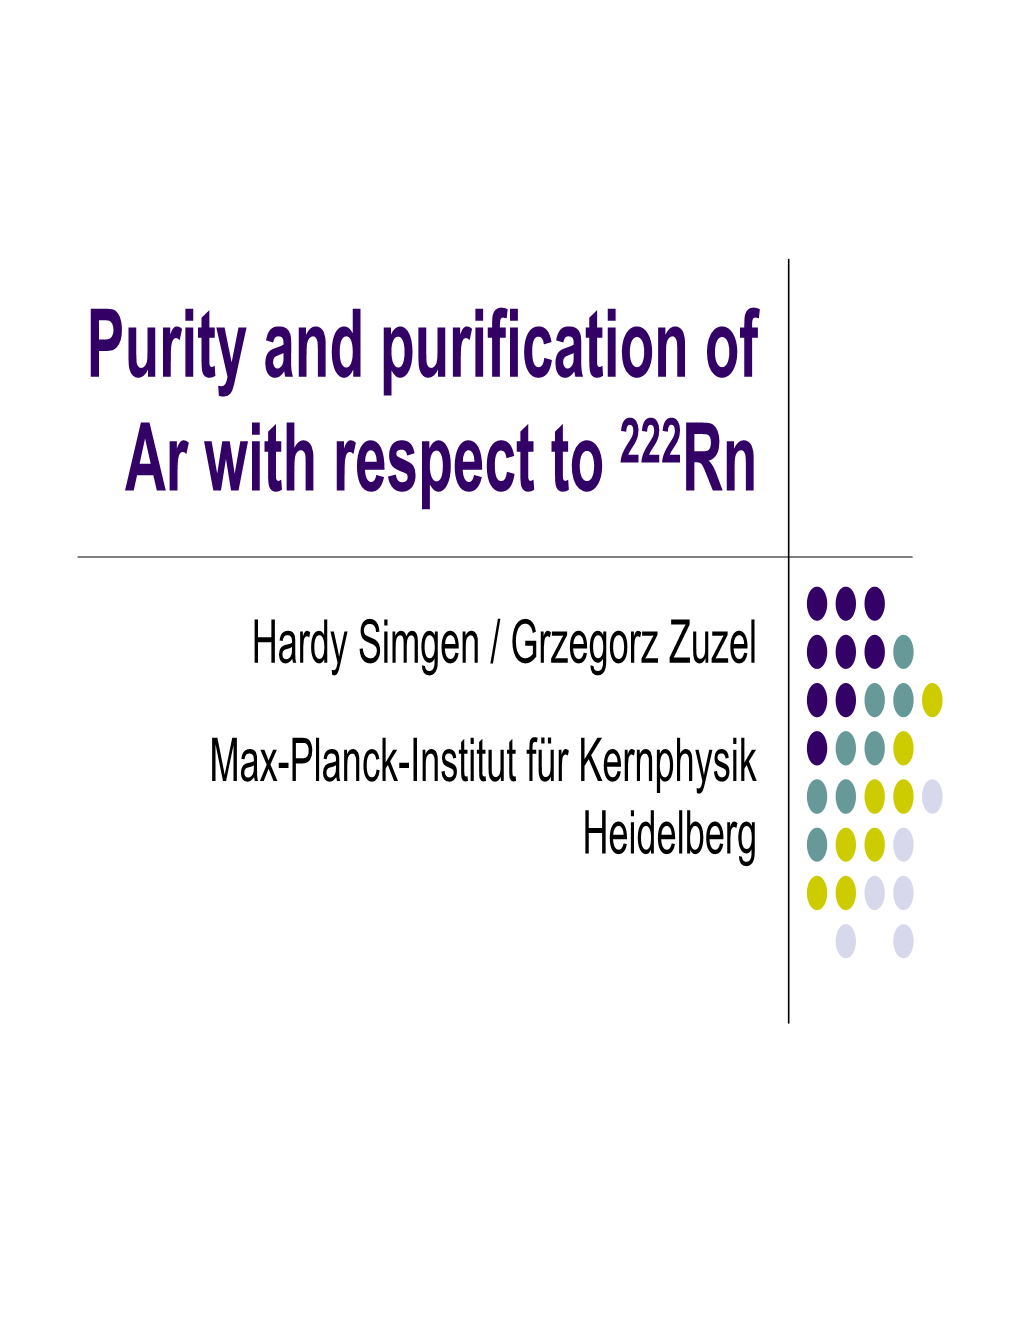 Purity and Purification of Ar with Respect to 222Rn